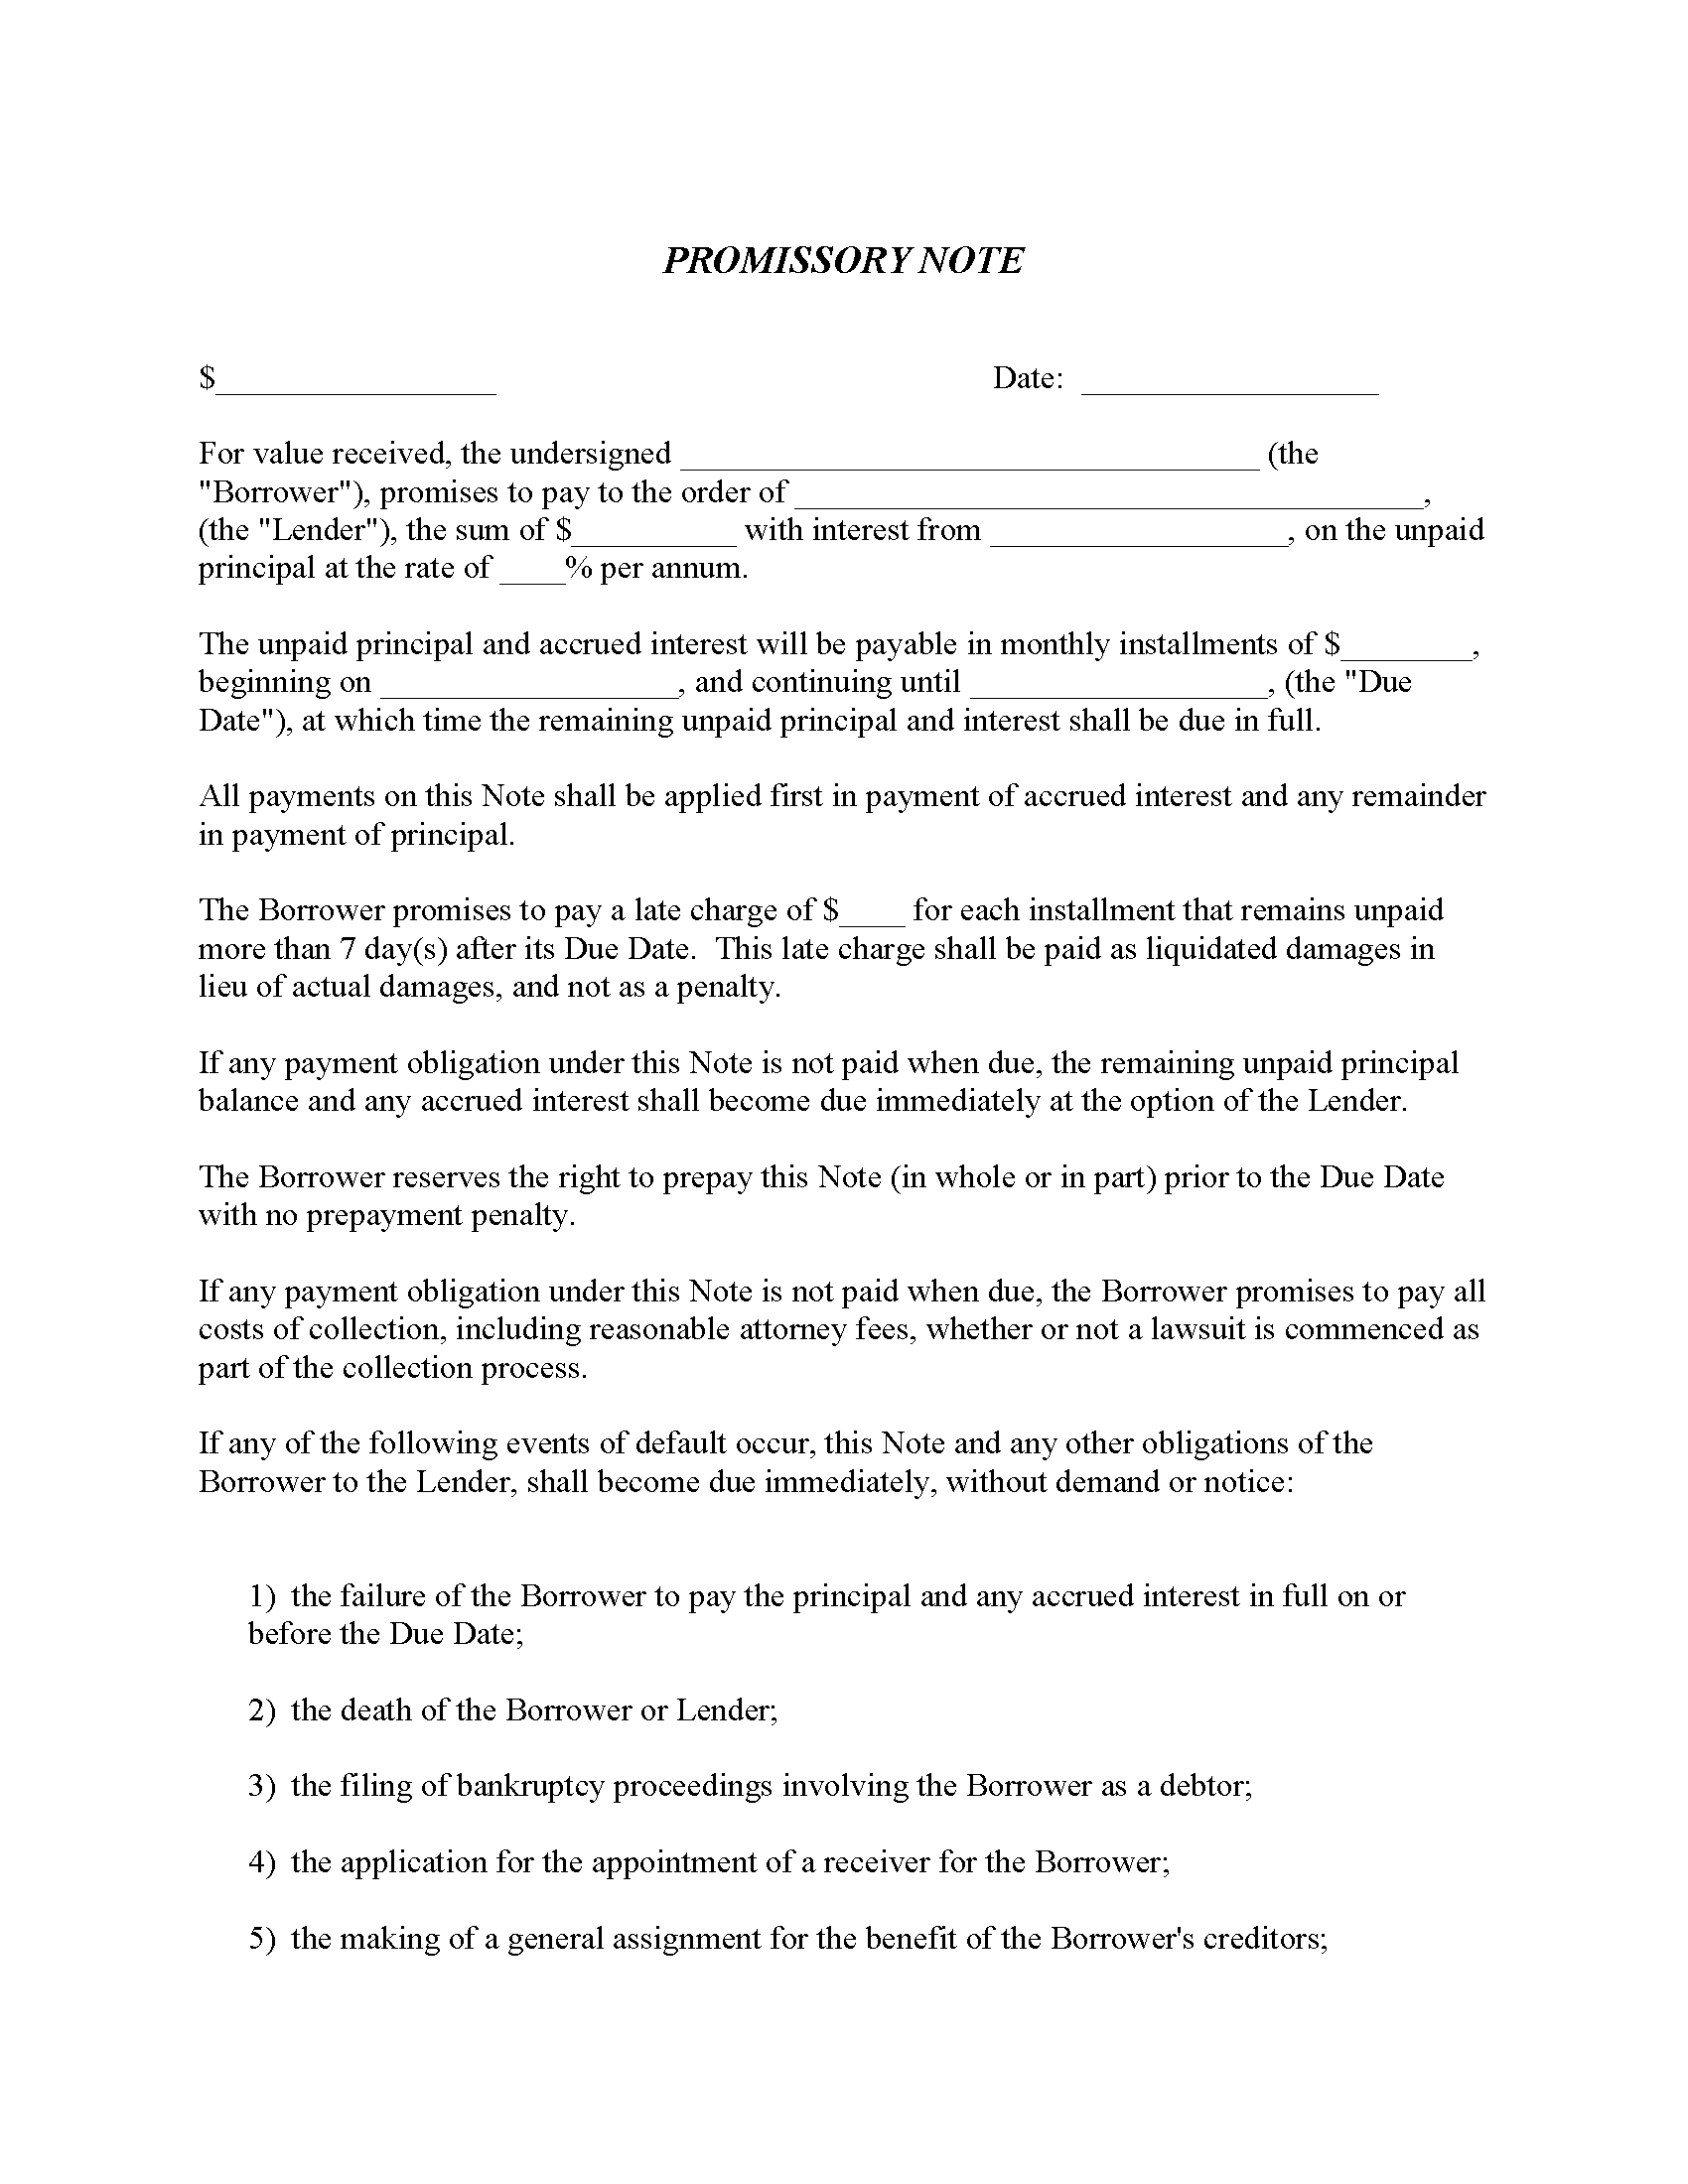 Promissory Note Fillable PDF Free Printable Legal Forms